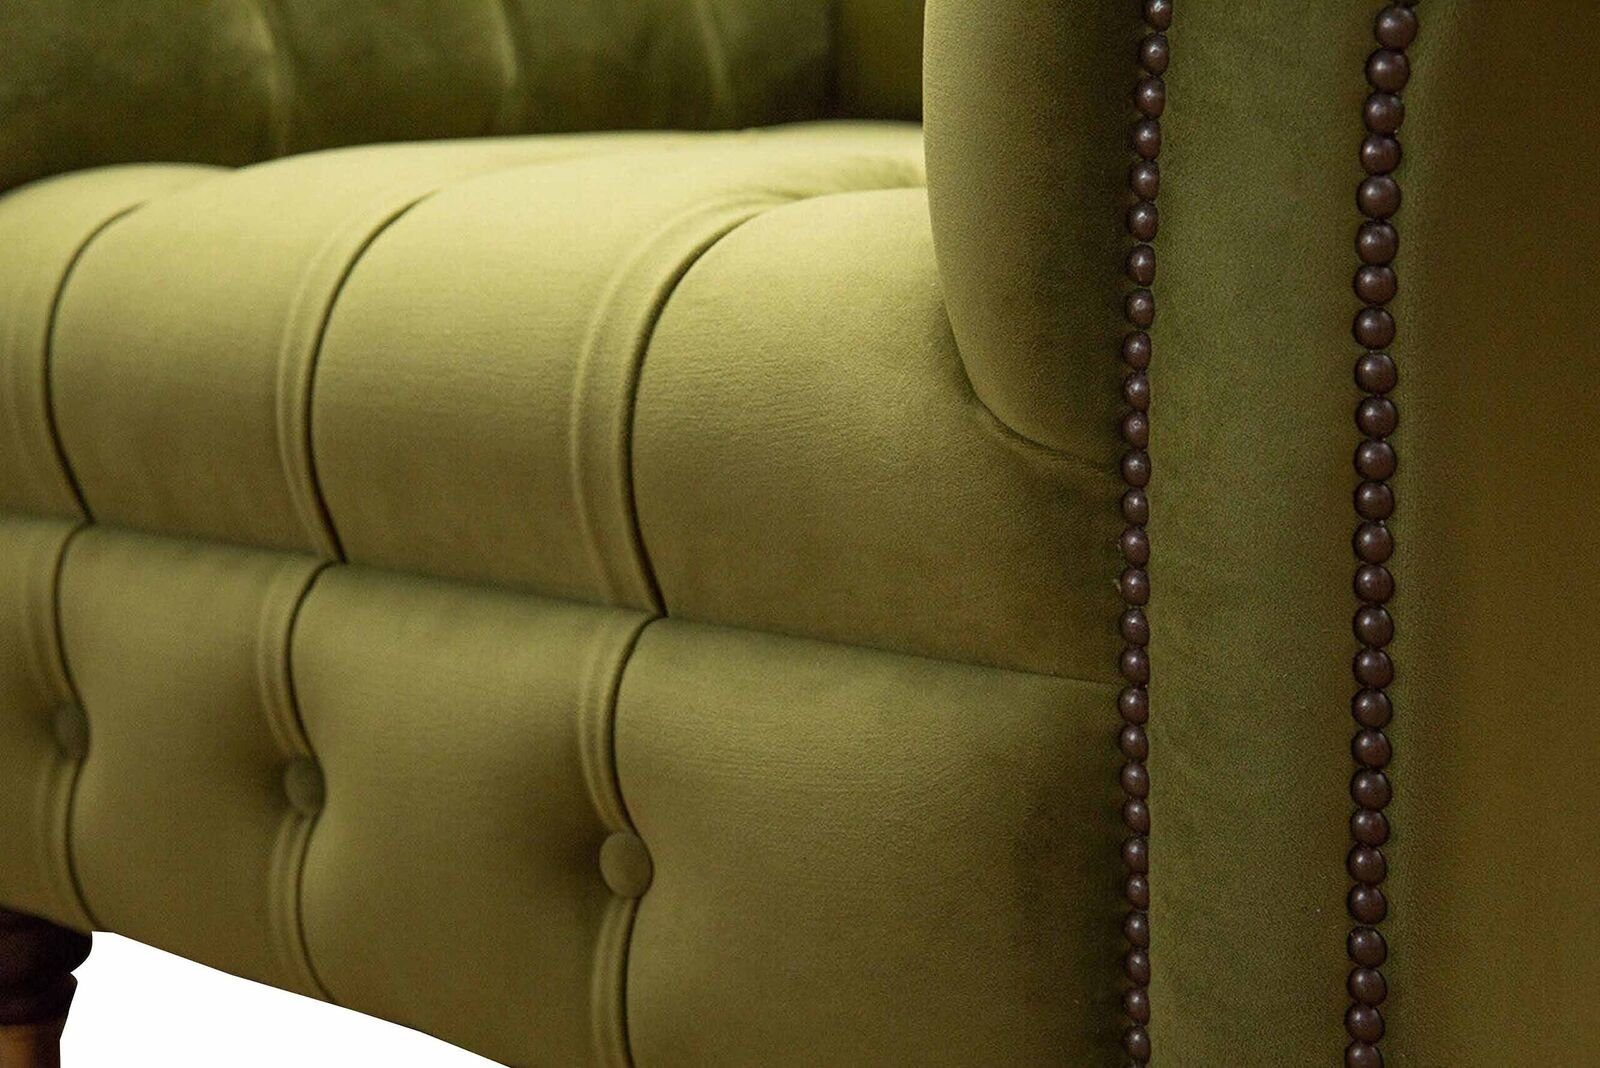 JVmoebel Sessel Chesterfield Luxus Couchen, Polster Textil Design Europe Sessel Couch In Made